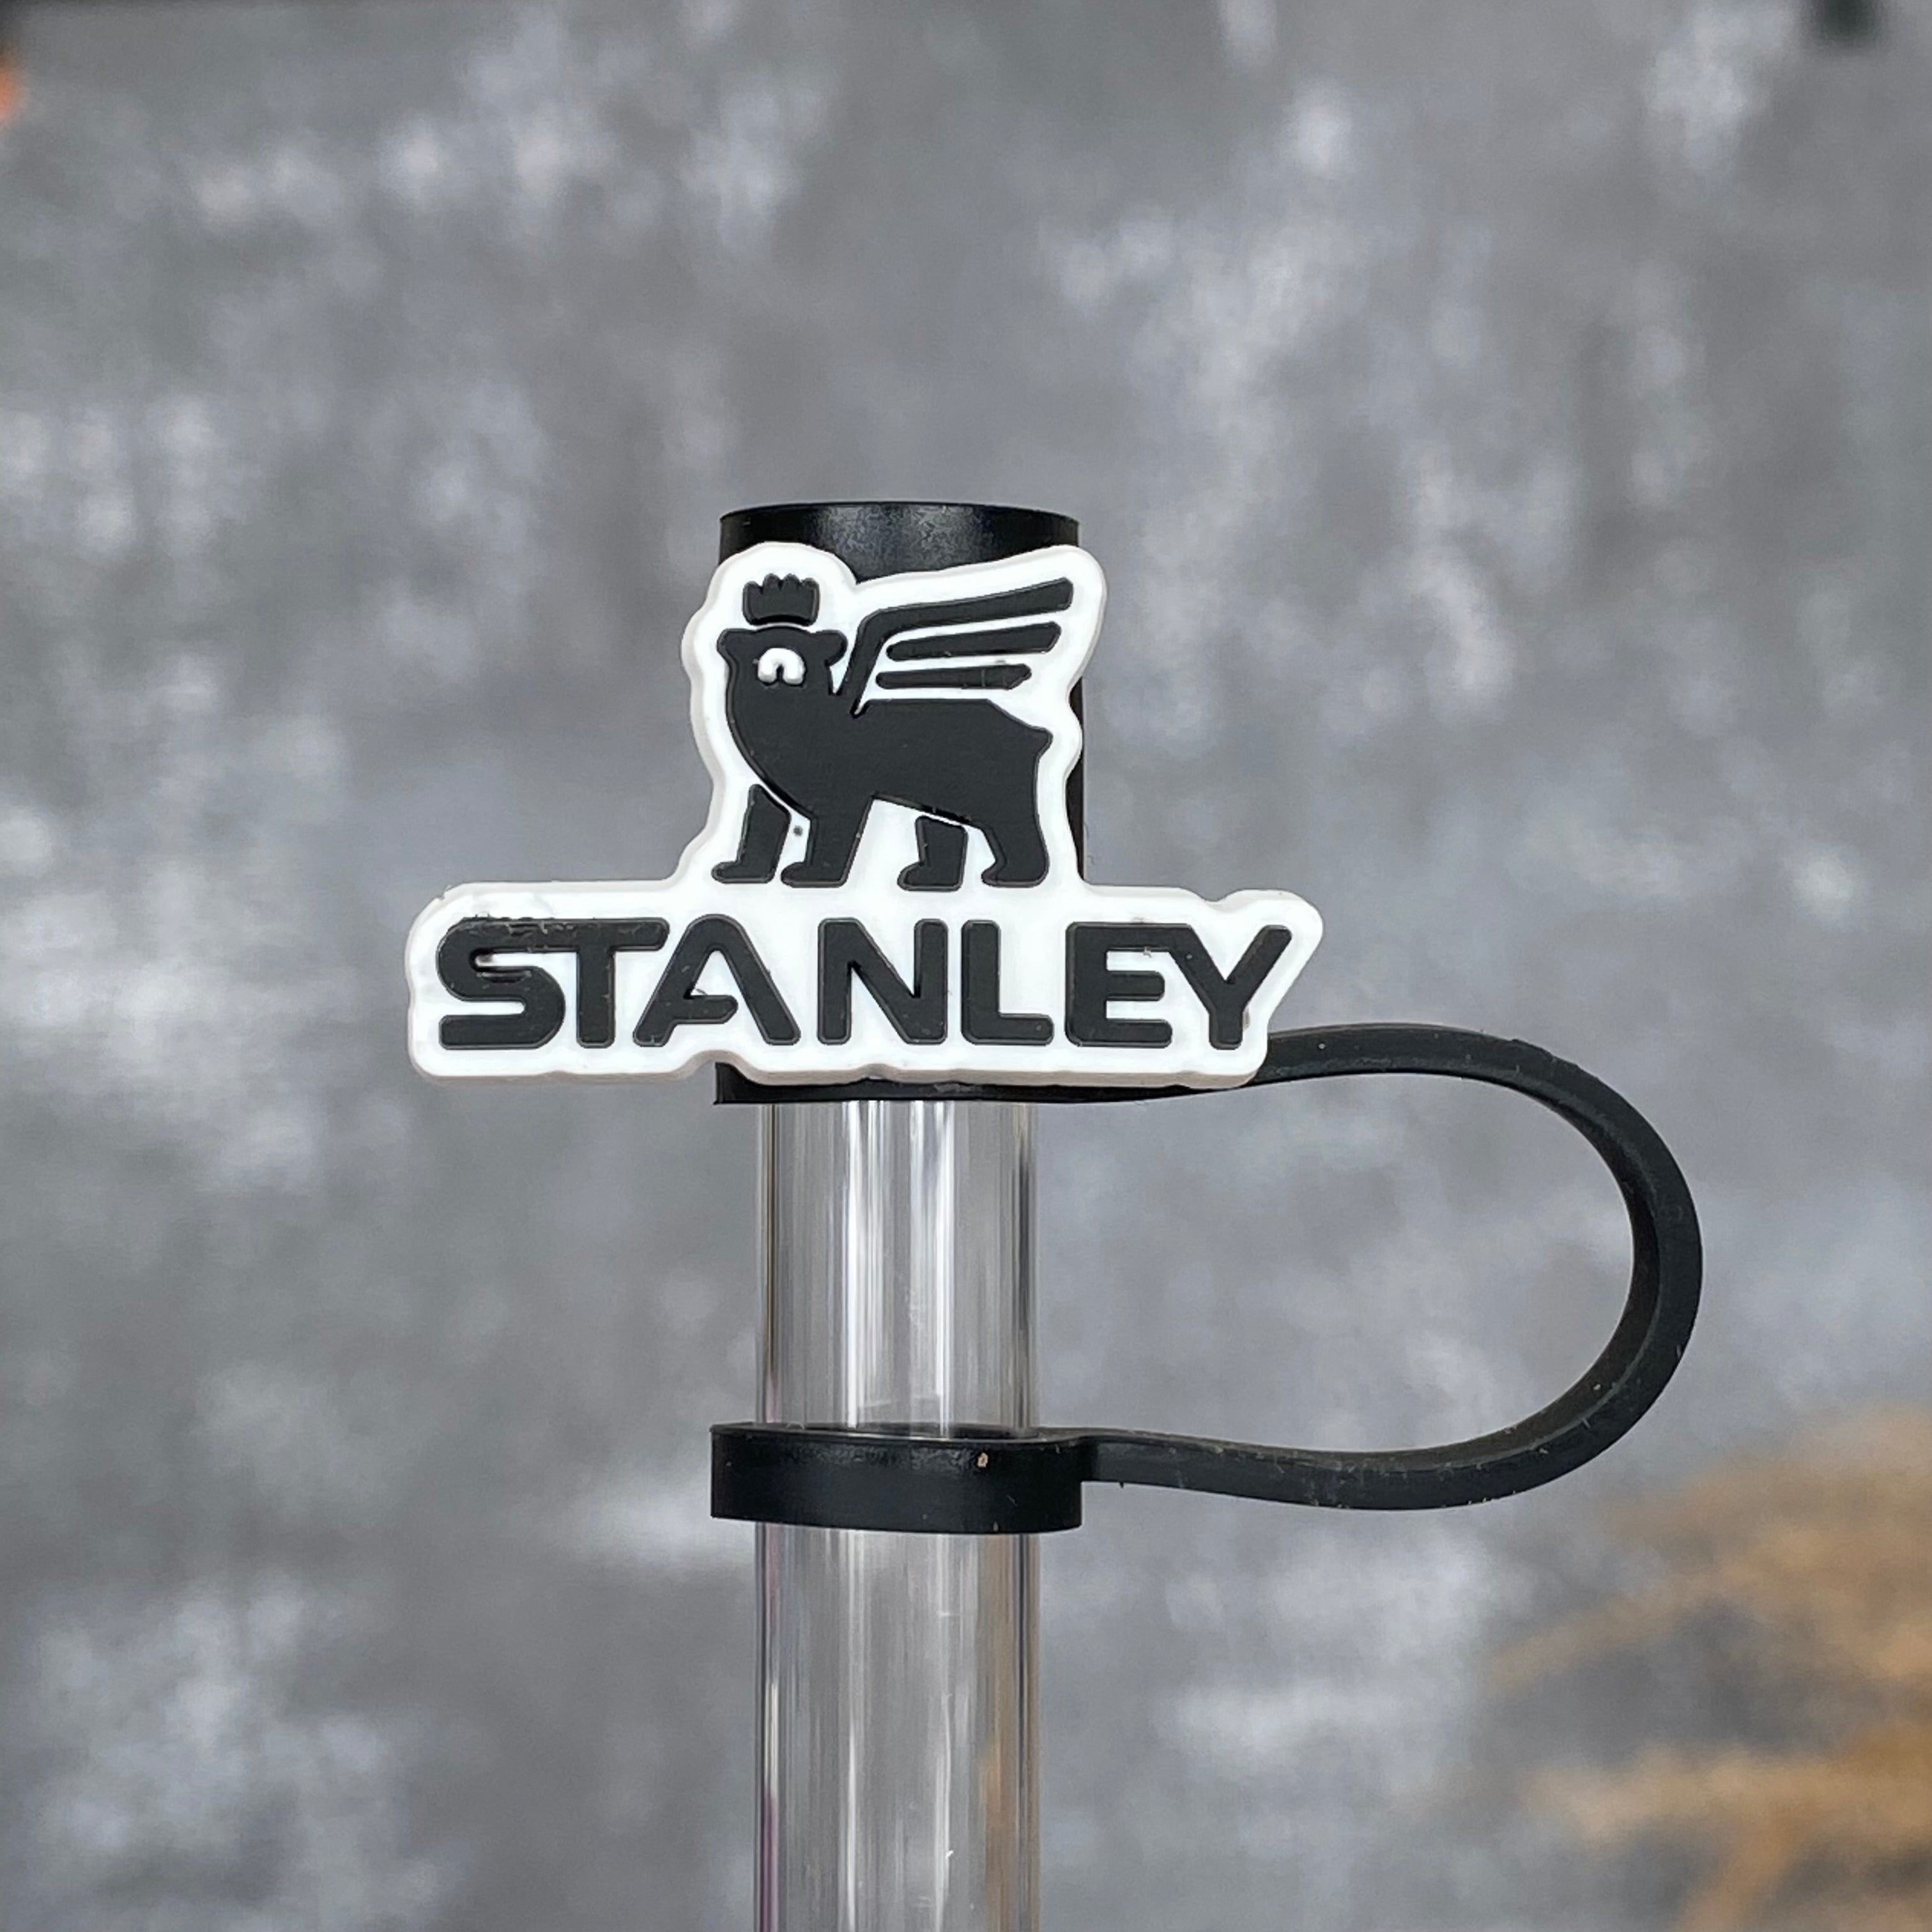 Straw Topper for Stanley/Simple Modern Tumbler, Bow Straw Decor for St